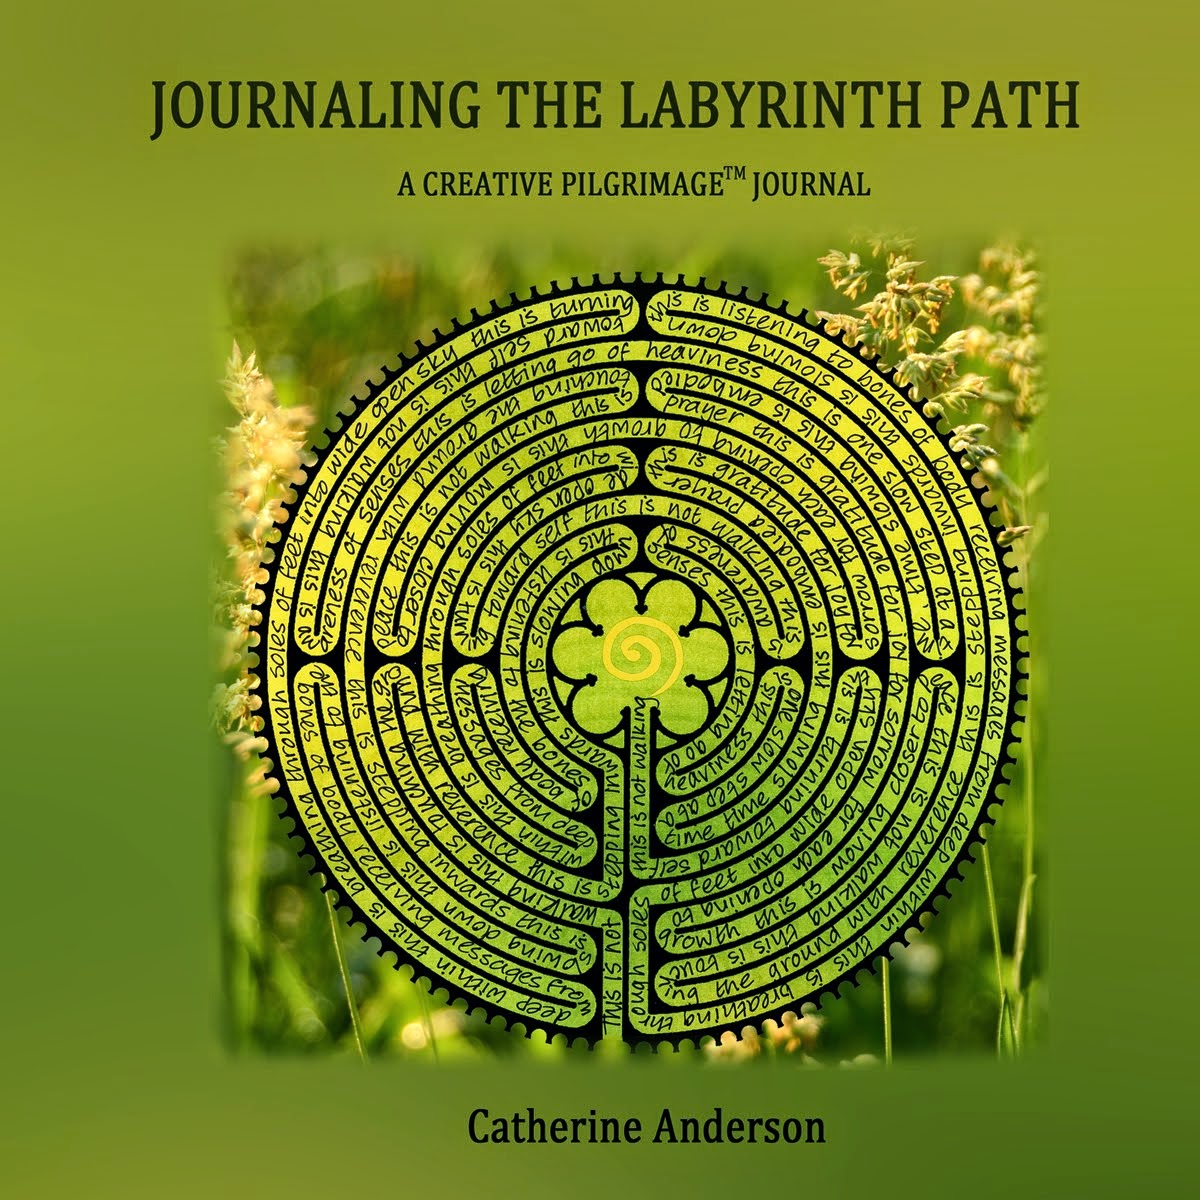 "Journaling the Labyrinth" journal